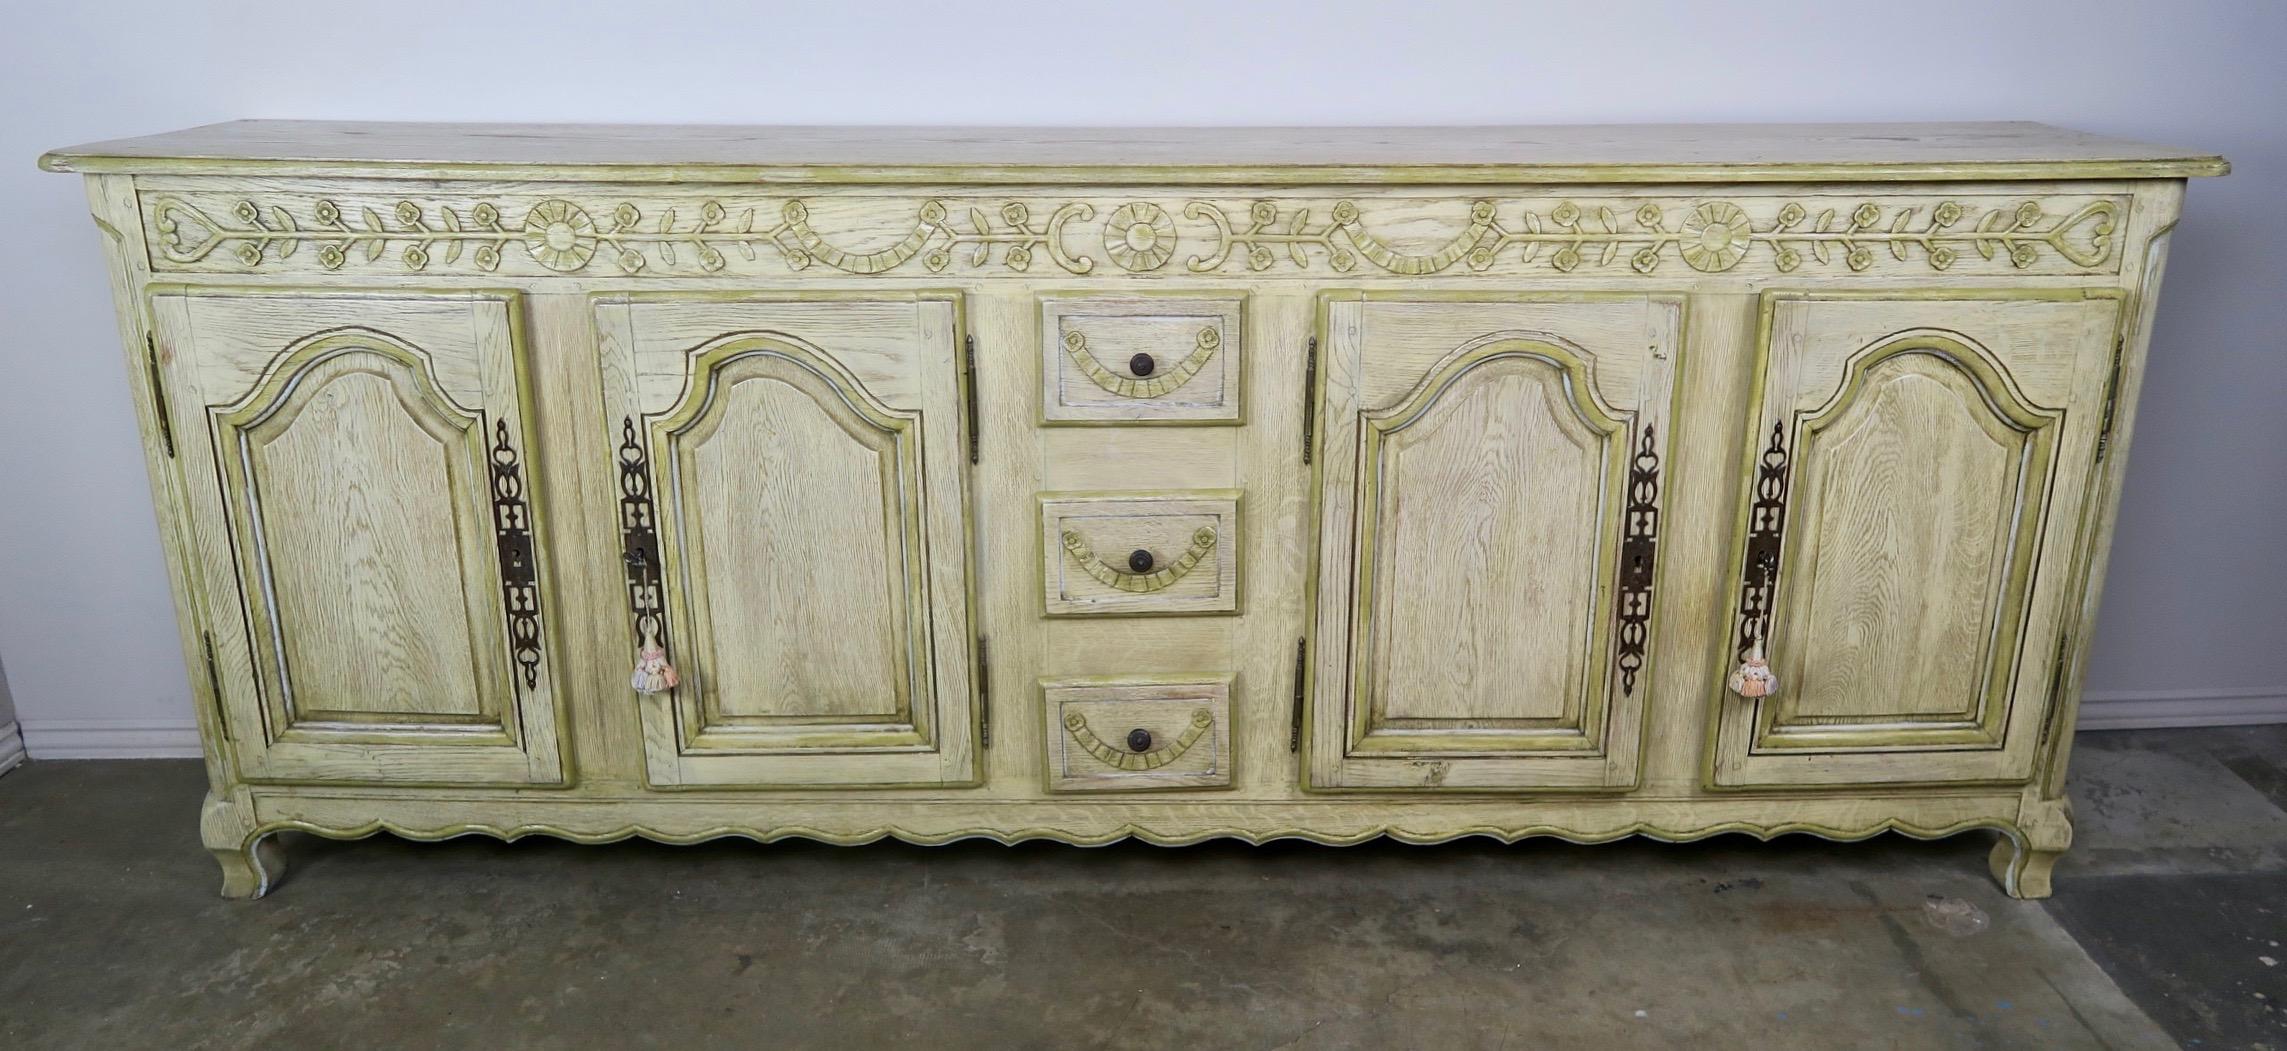 French Louis XV style carved elm painted buffet with a beautiful worn finish. The sideboard stands on four legs, cabriole shaped connected by a scalloped bottom edge detail. There are four doors with original antique hardware that flank three